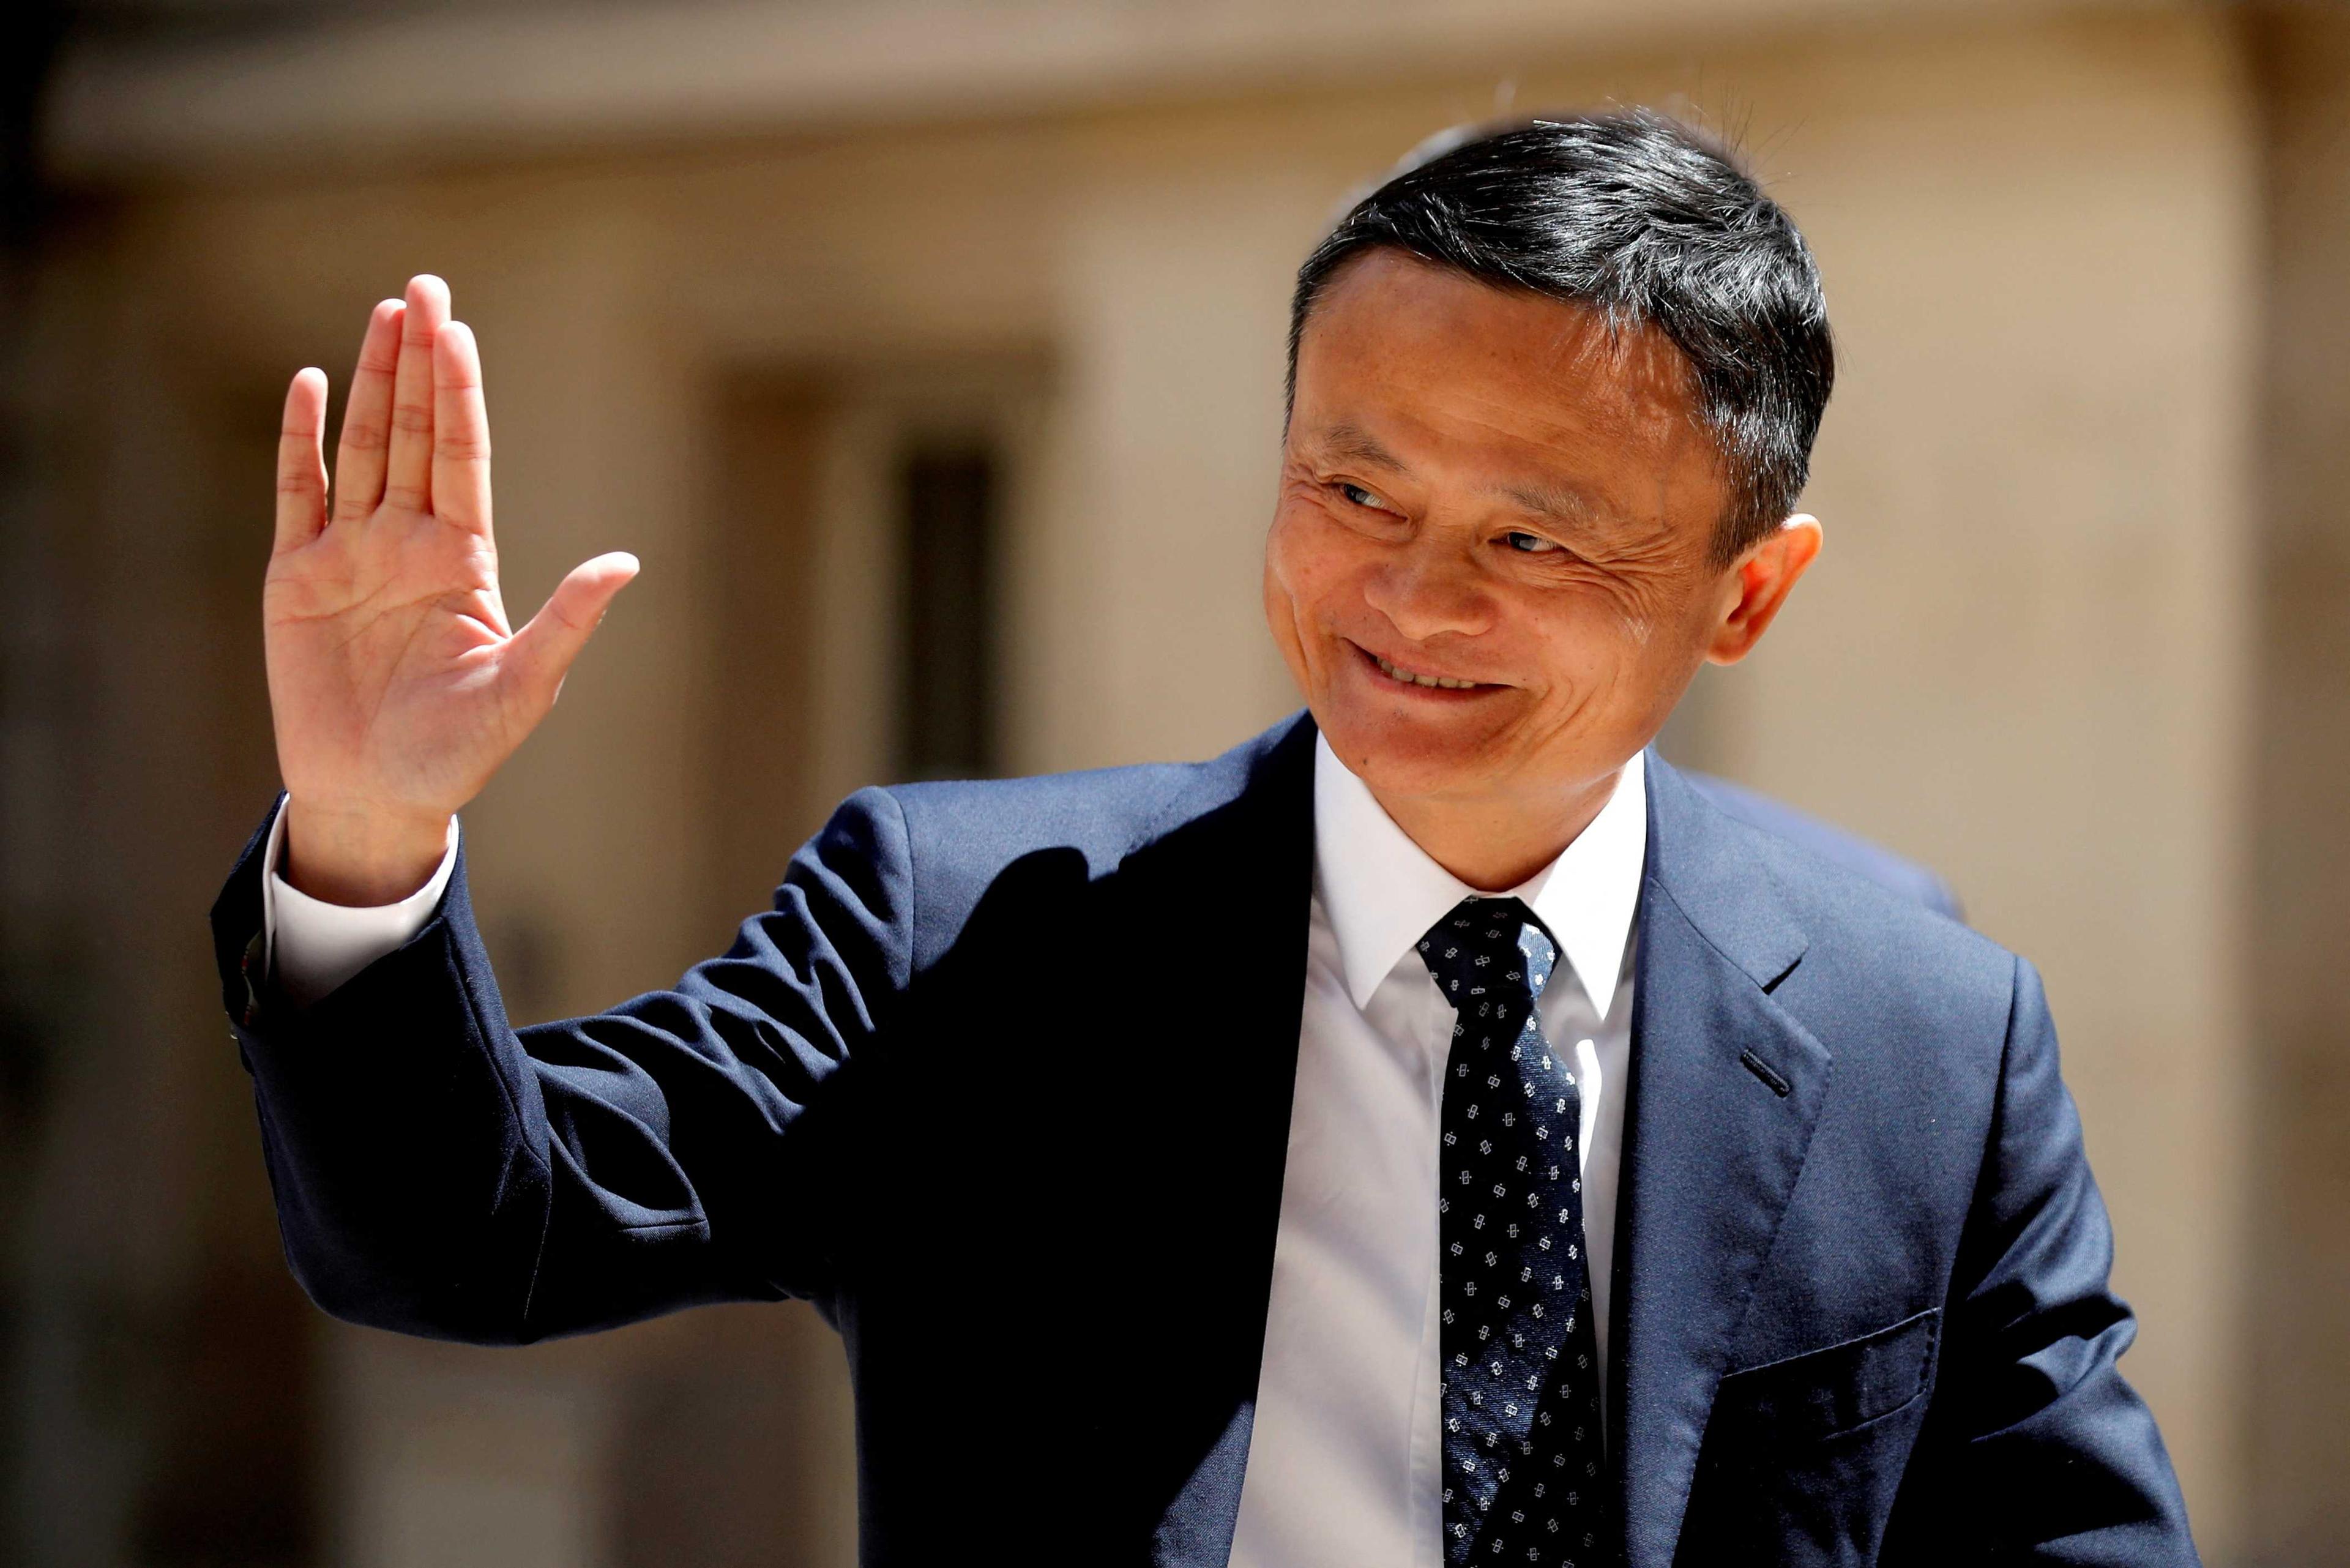 Jack Ma, billionaire founder of Alibaba Group, arrives at the 'Tech for Good' Summit in Paris, France May 15, 2019. Photo: Reuters